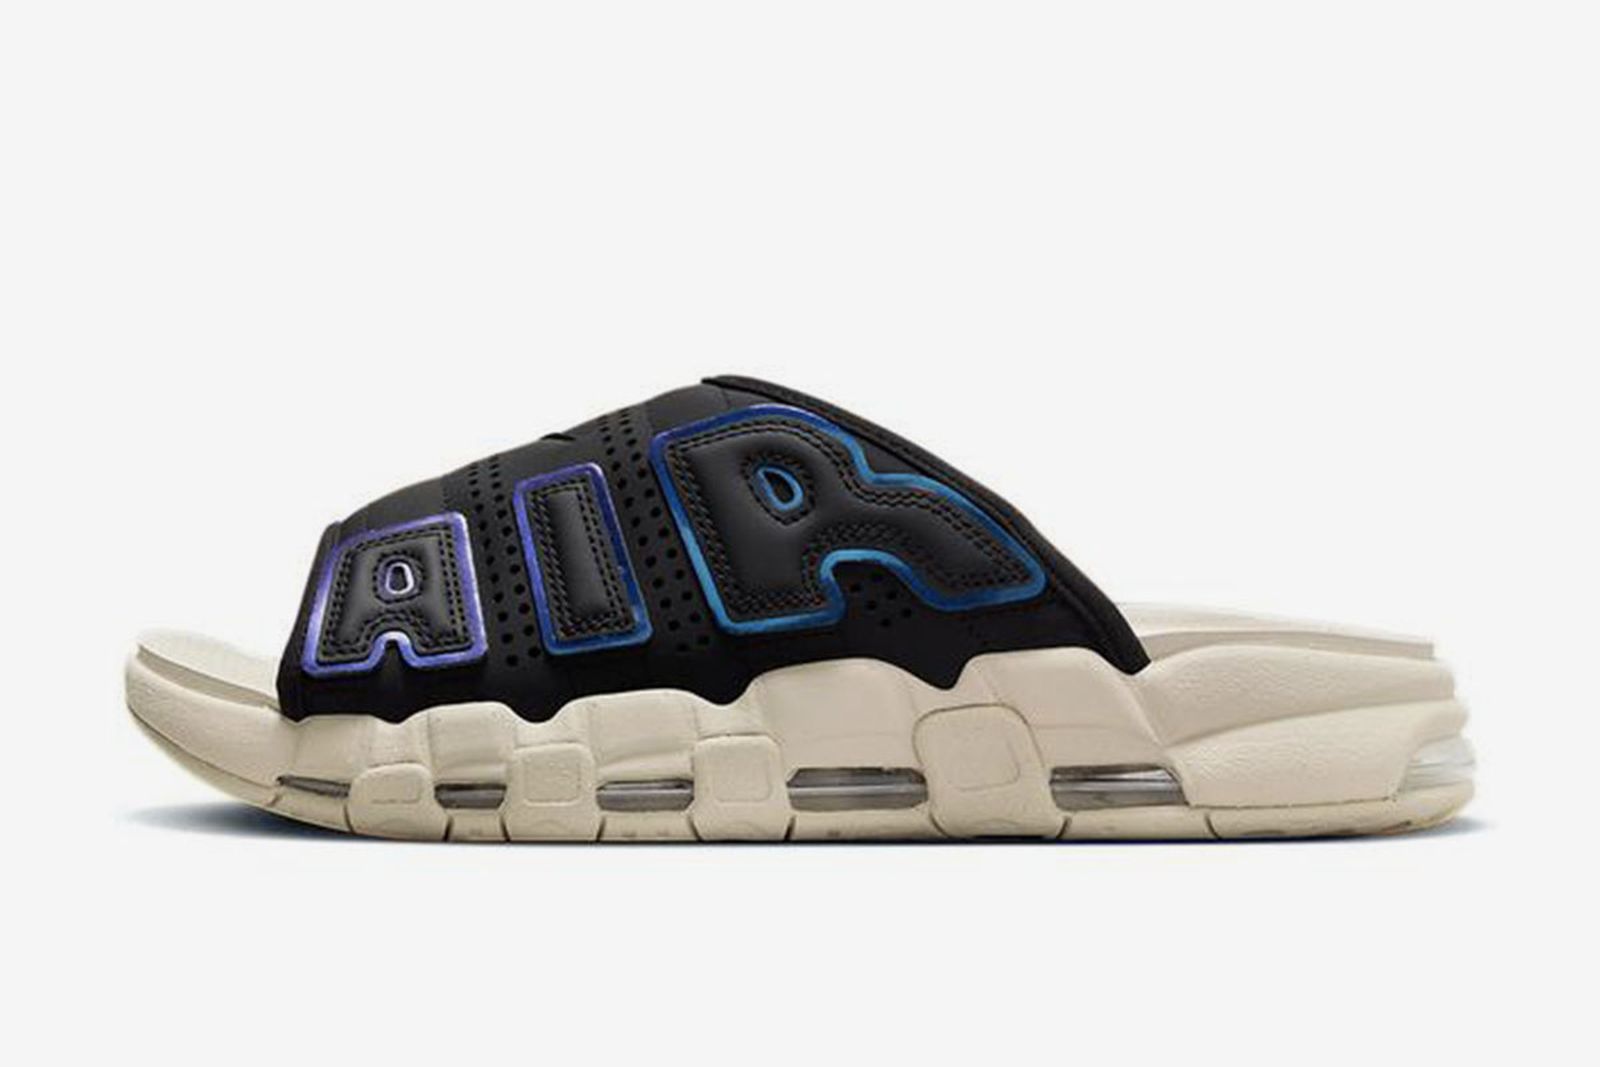 Nike Air More Uptempo Sandal Finally Releases